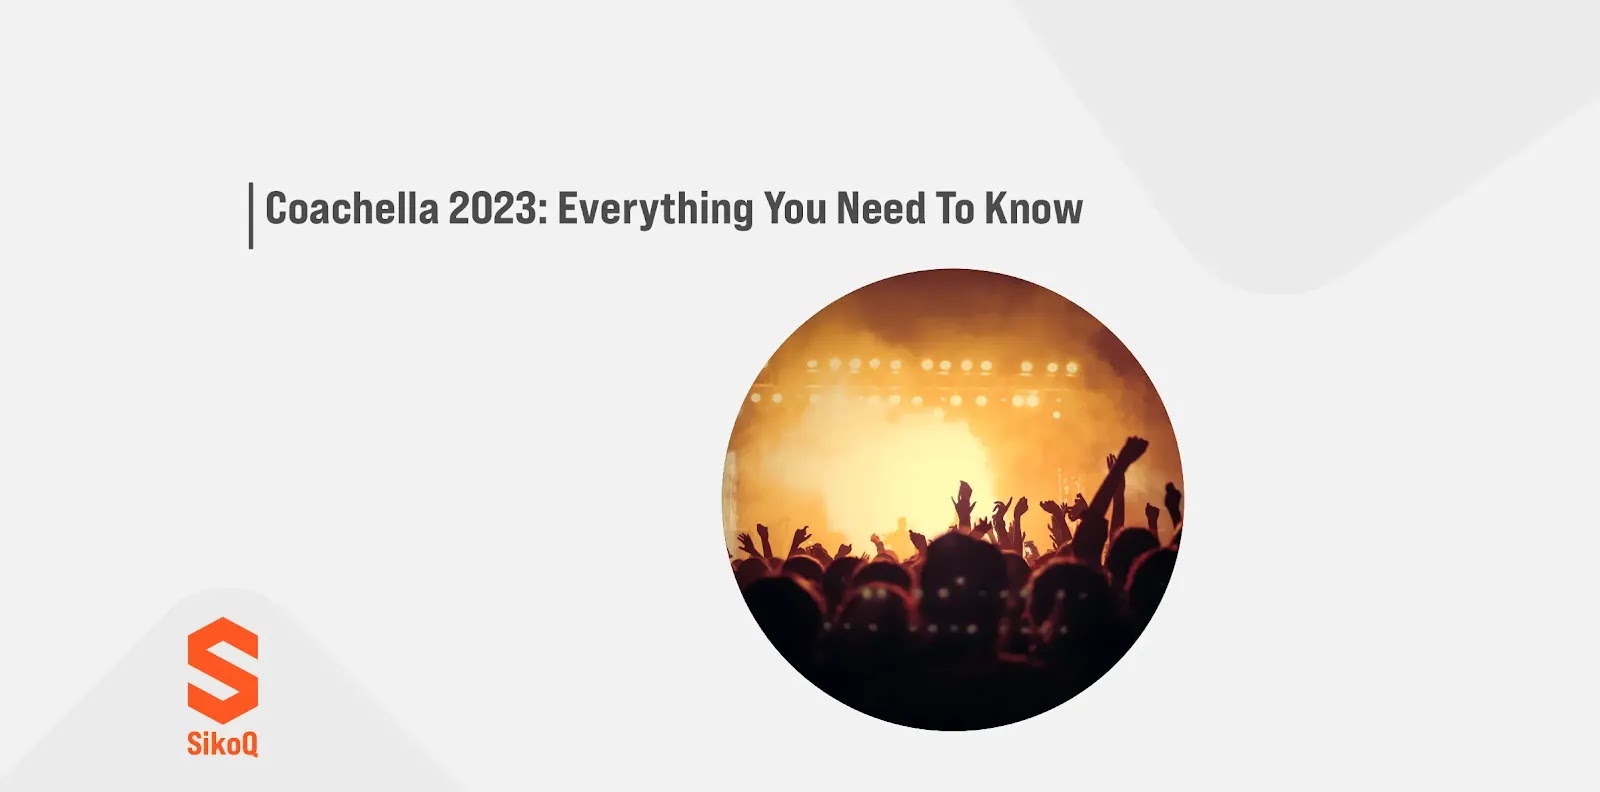 Coachella 2023: Everything You Need To Know